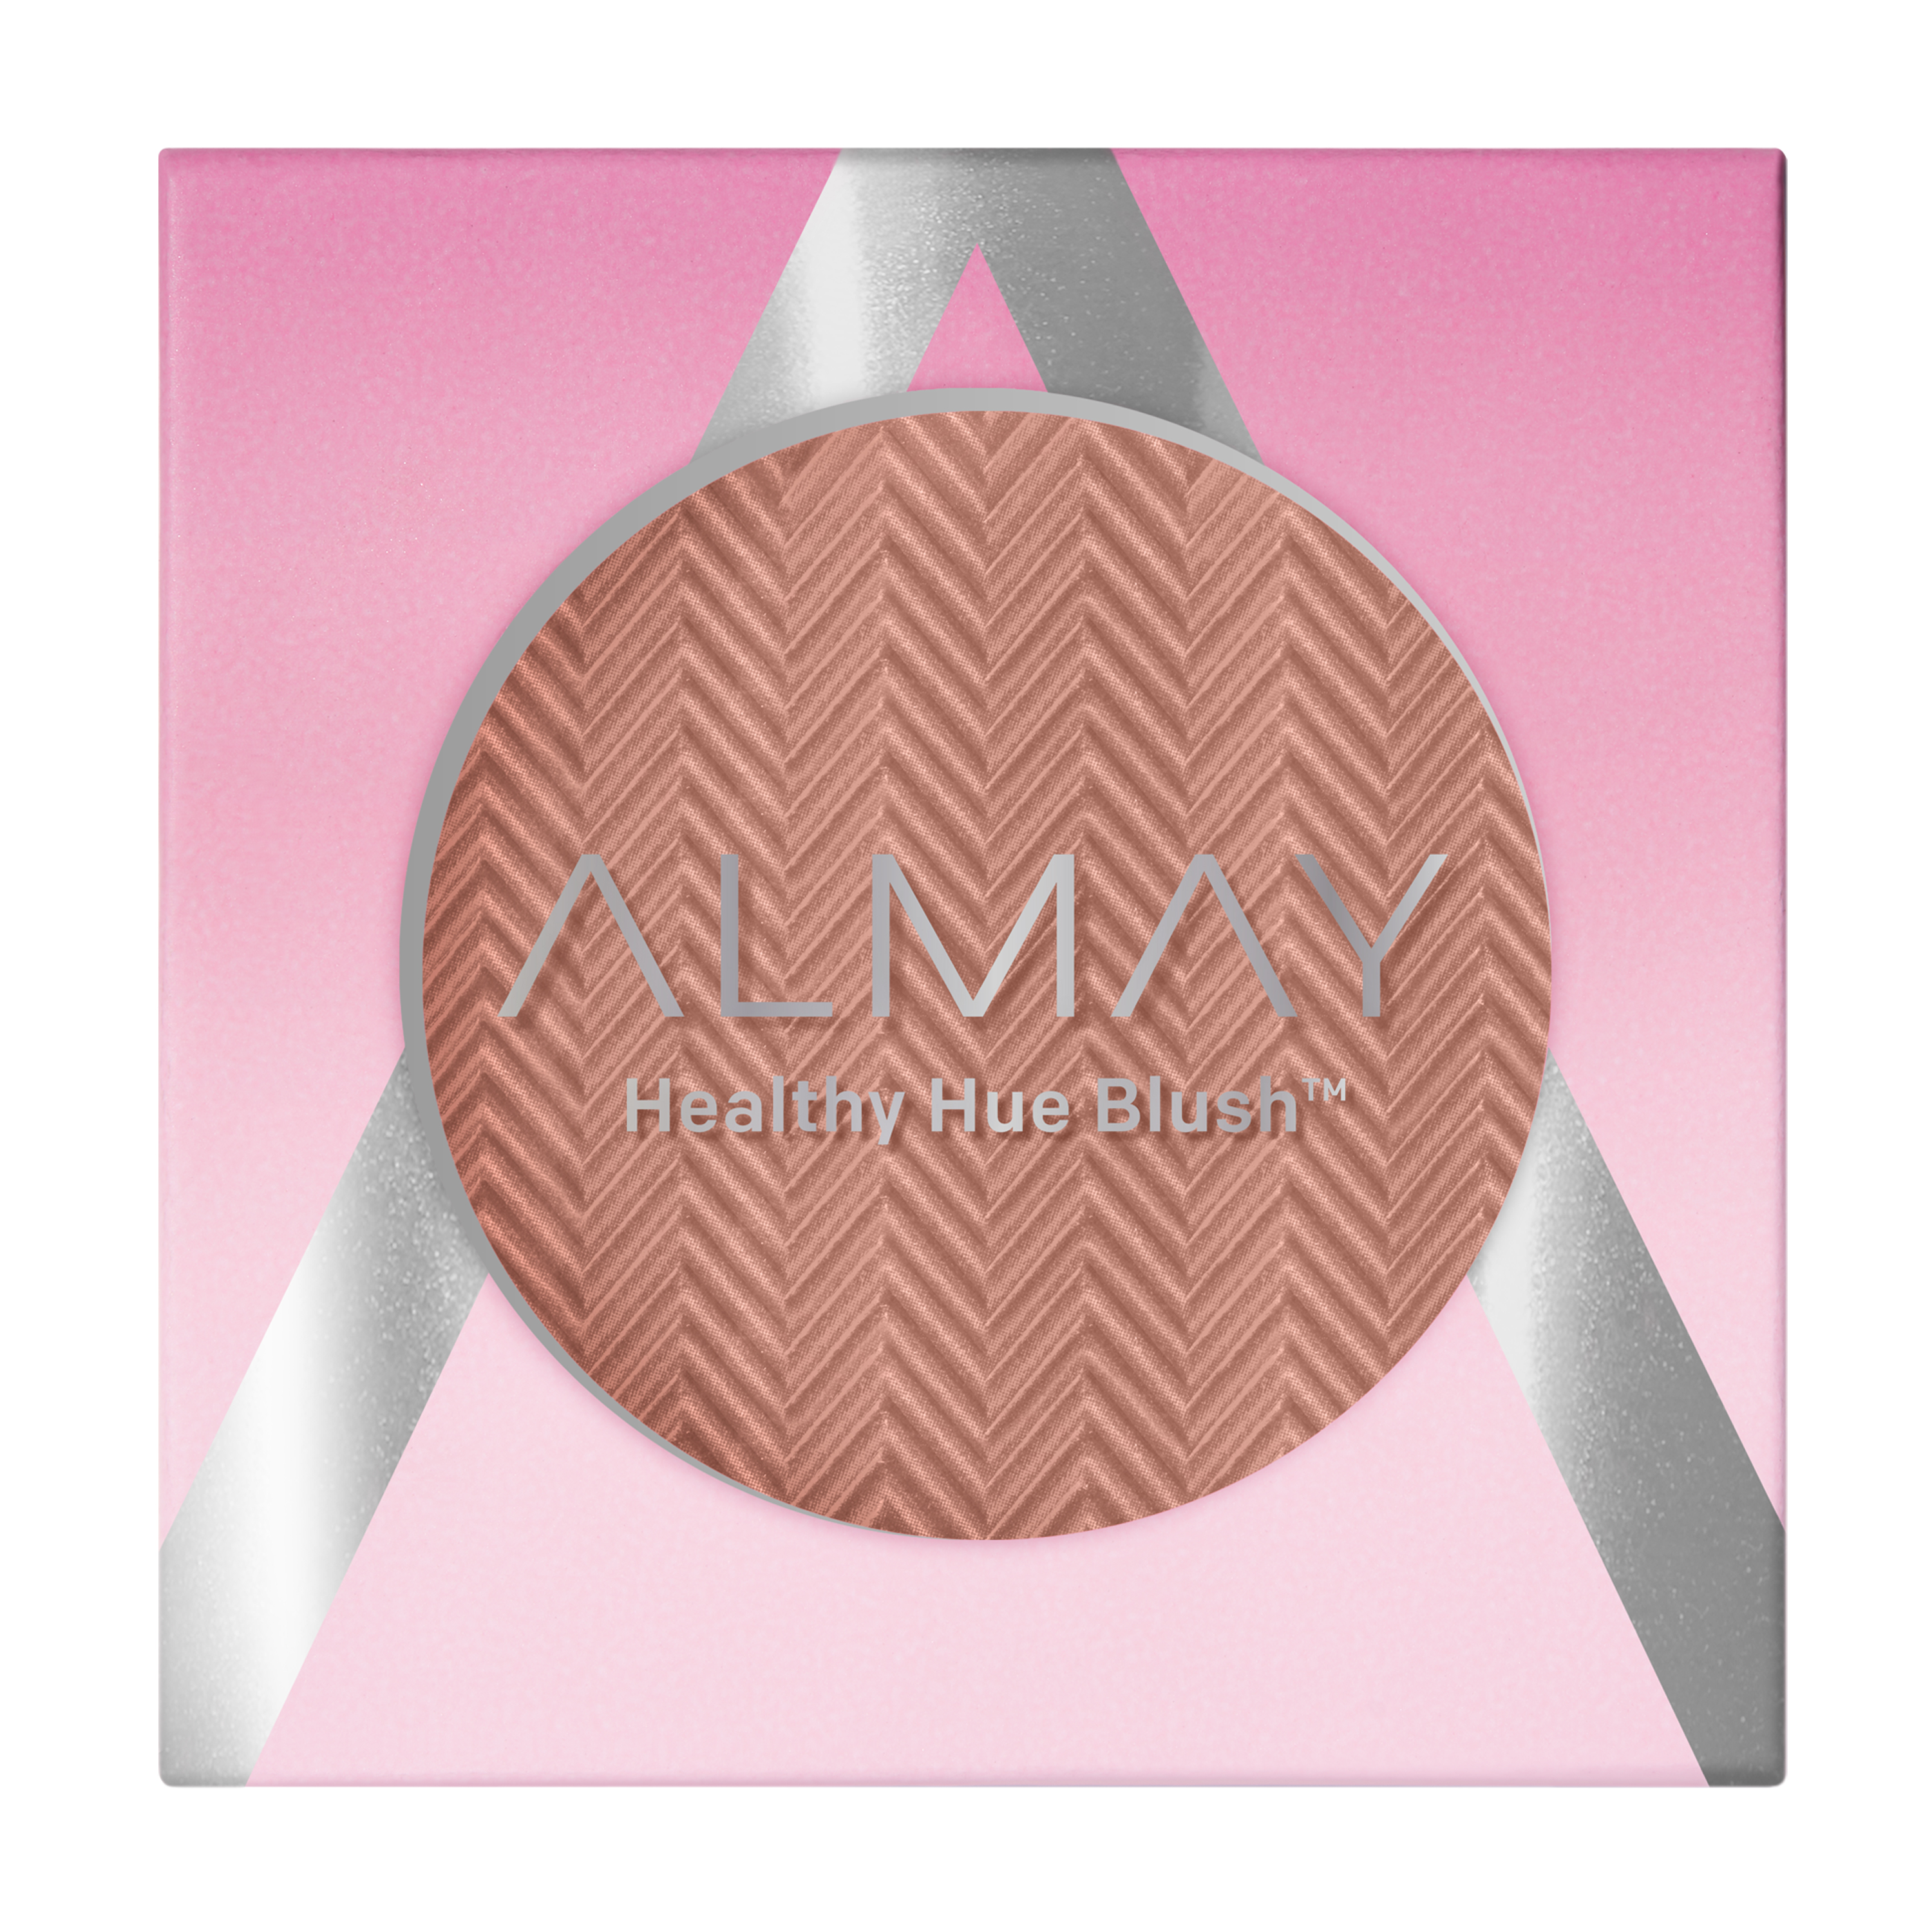 Almay Healthy Hue Powder Blush, Lightweight, Nearly Nude 100, 0.17 oz - image 1 of 16